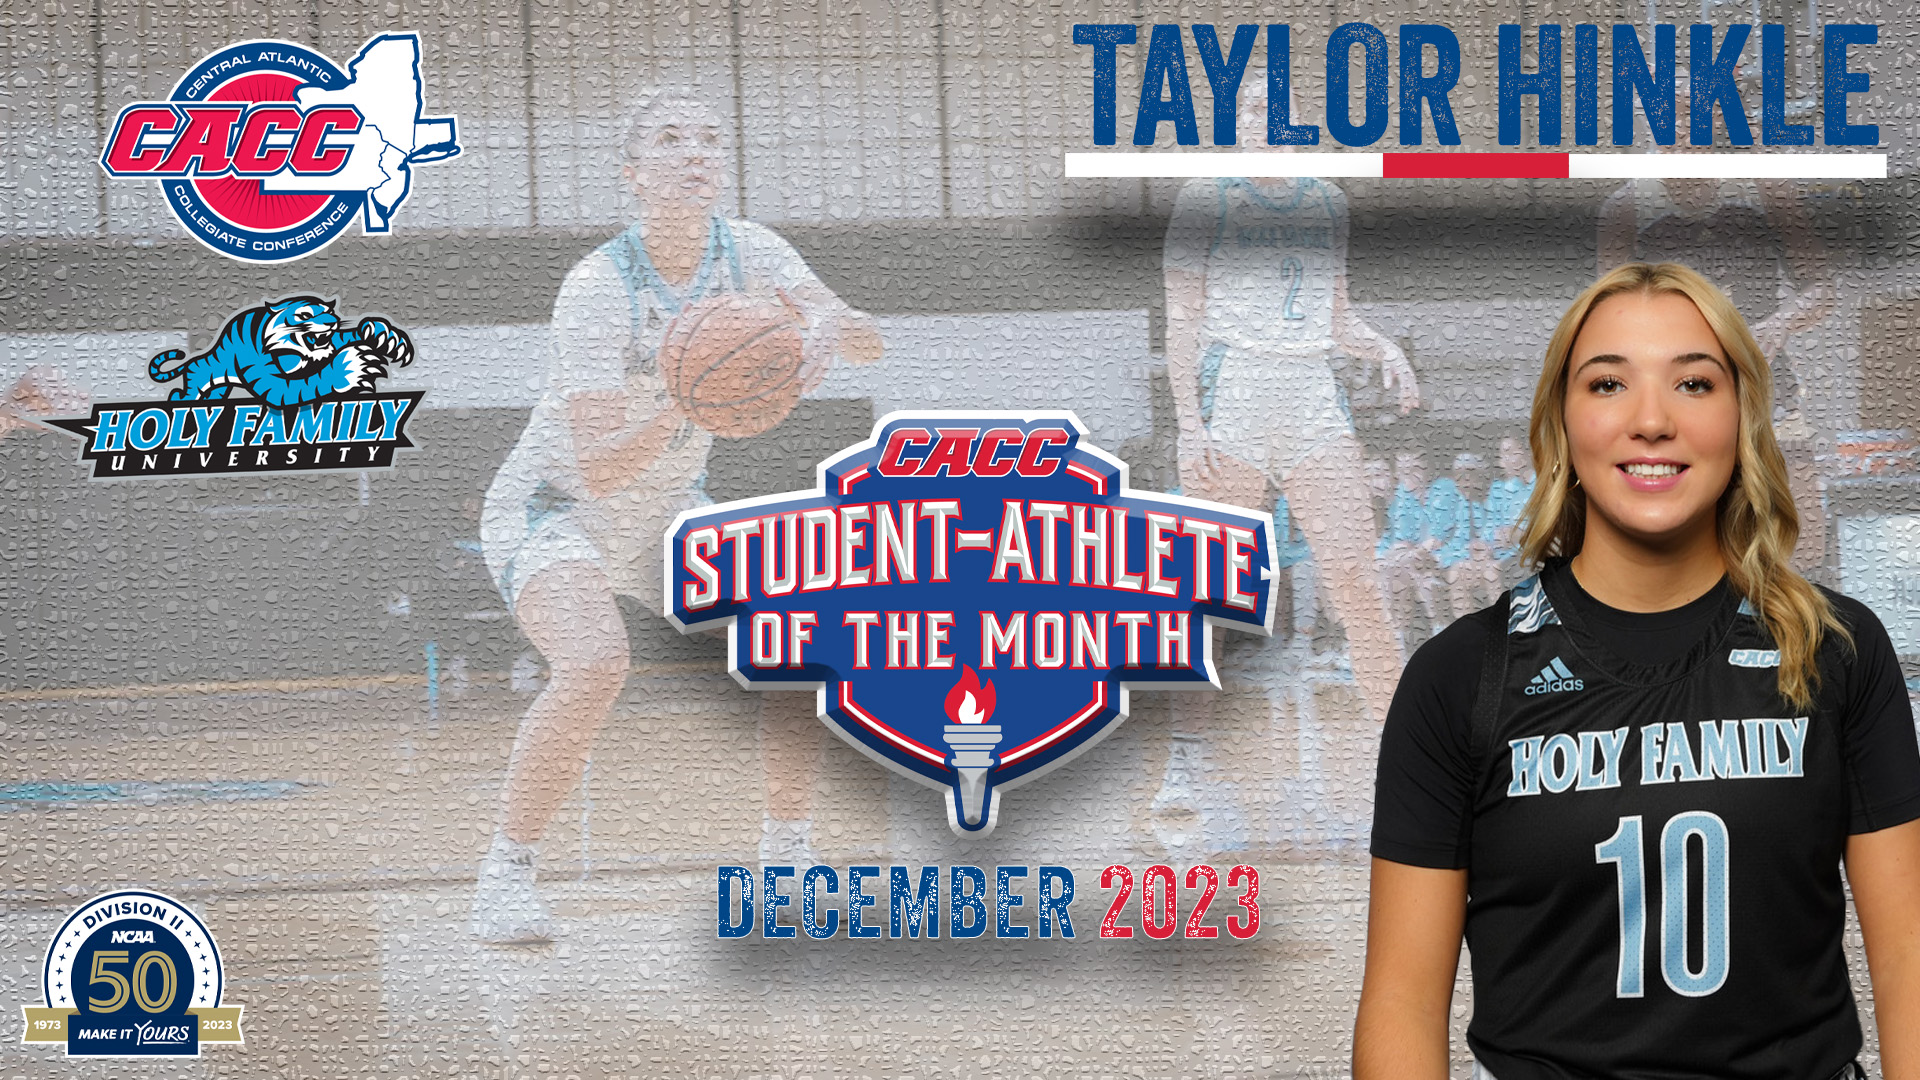 HFU's Taylor Hinkle Named CACC S-A of the Month for December